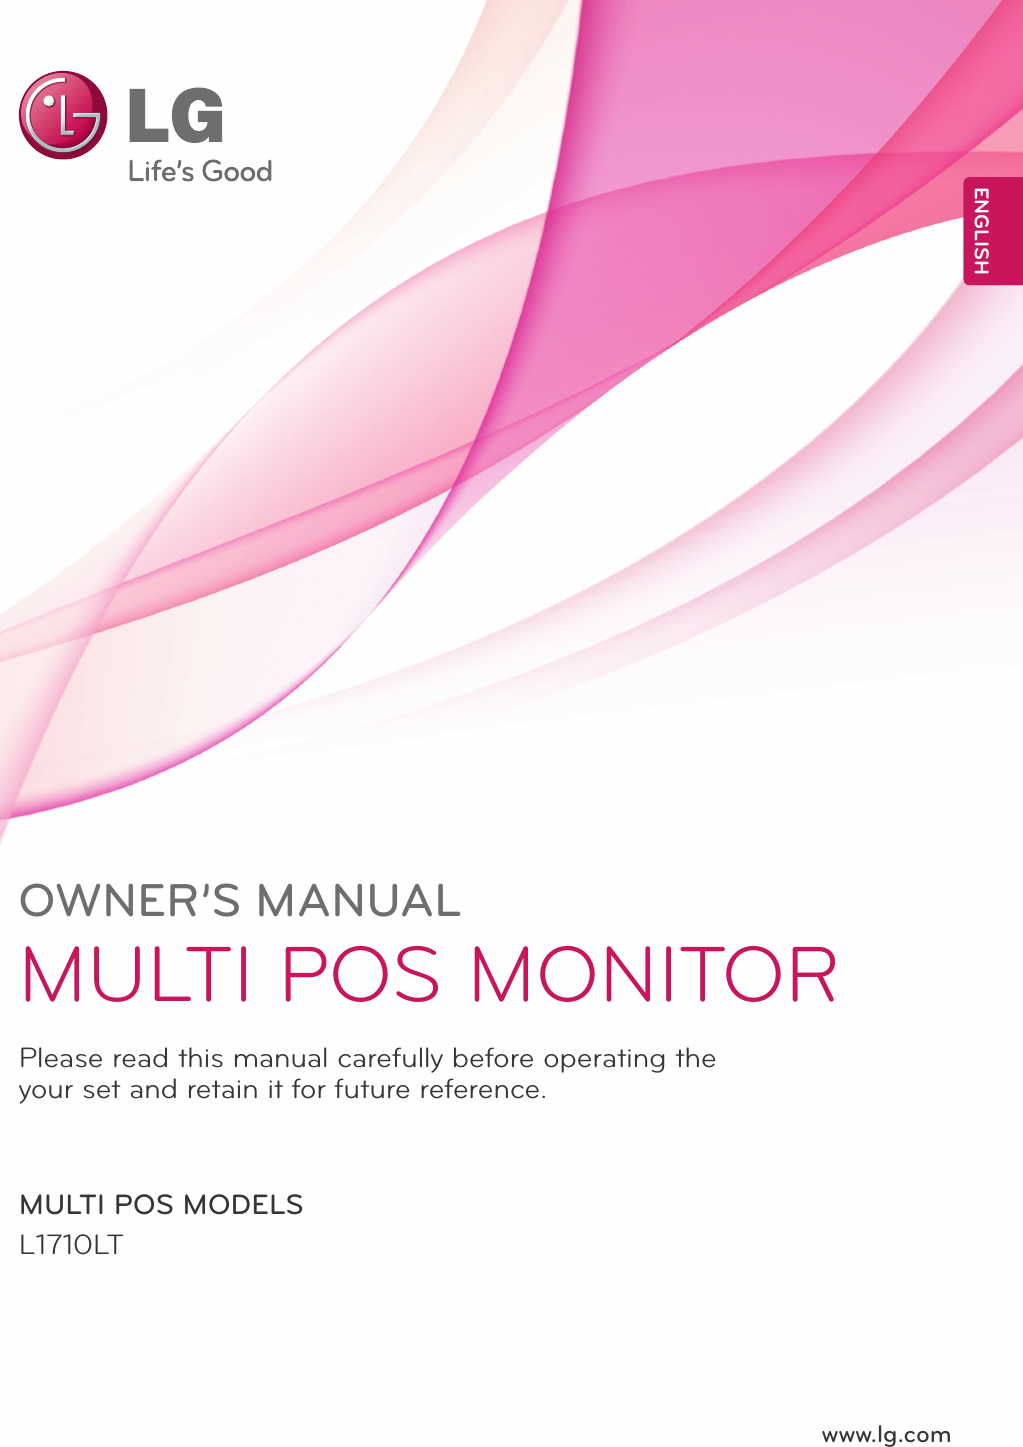 www.lg.comOWNER’S MANUALMULTI POS MONITORL1710LTPlease read this manual carefully before operating the your set and retain it for future reference.MULTI POS MODELSENGENGLISH